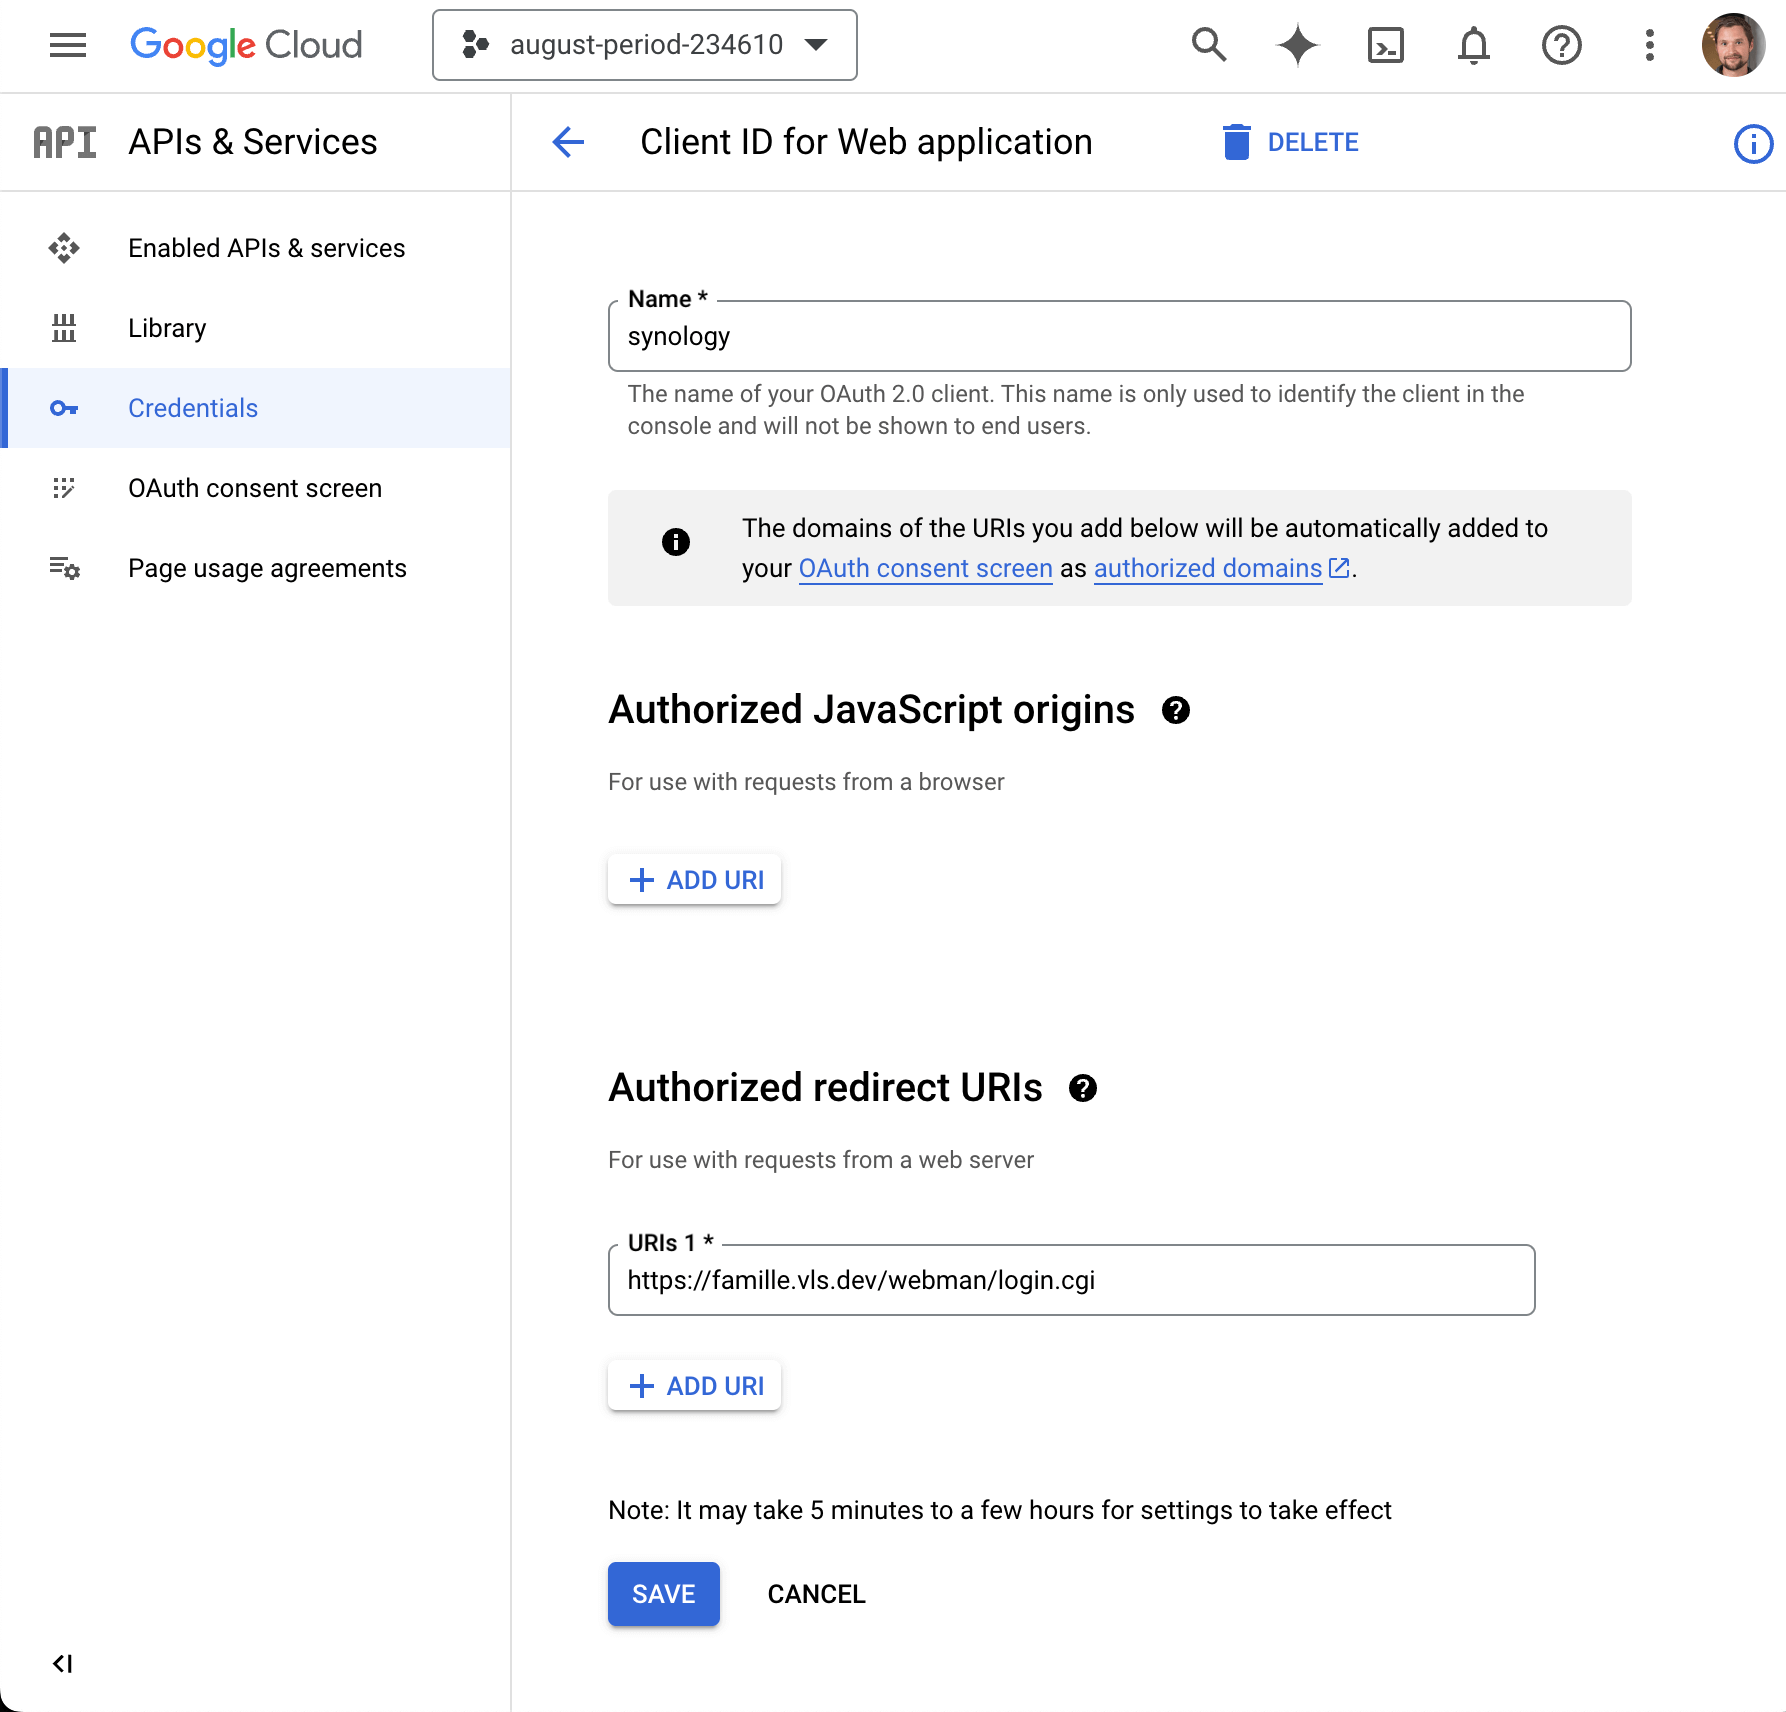 Credentials page in API and Services in GCP’s Console